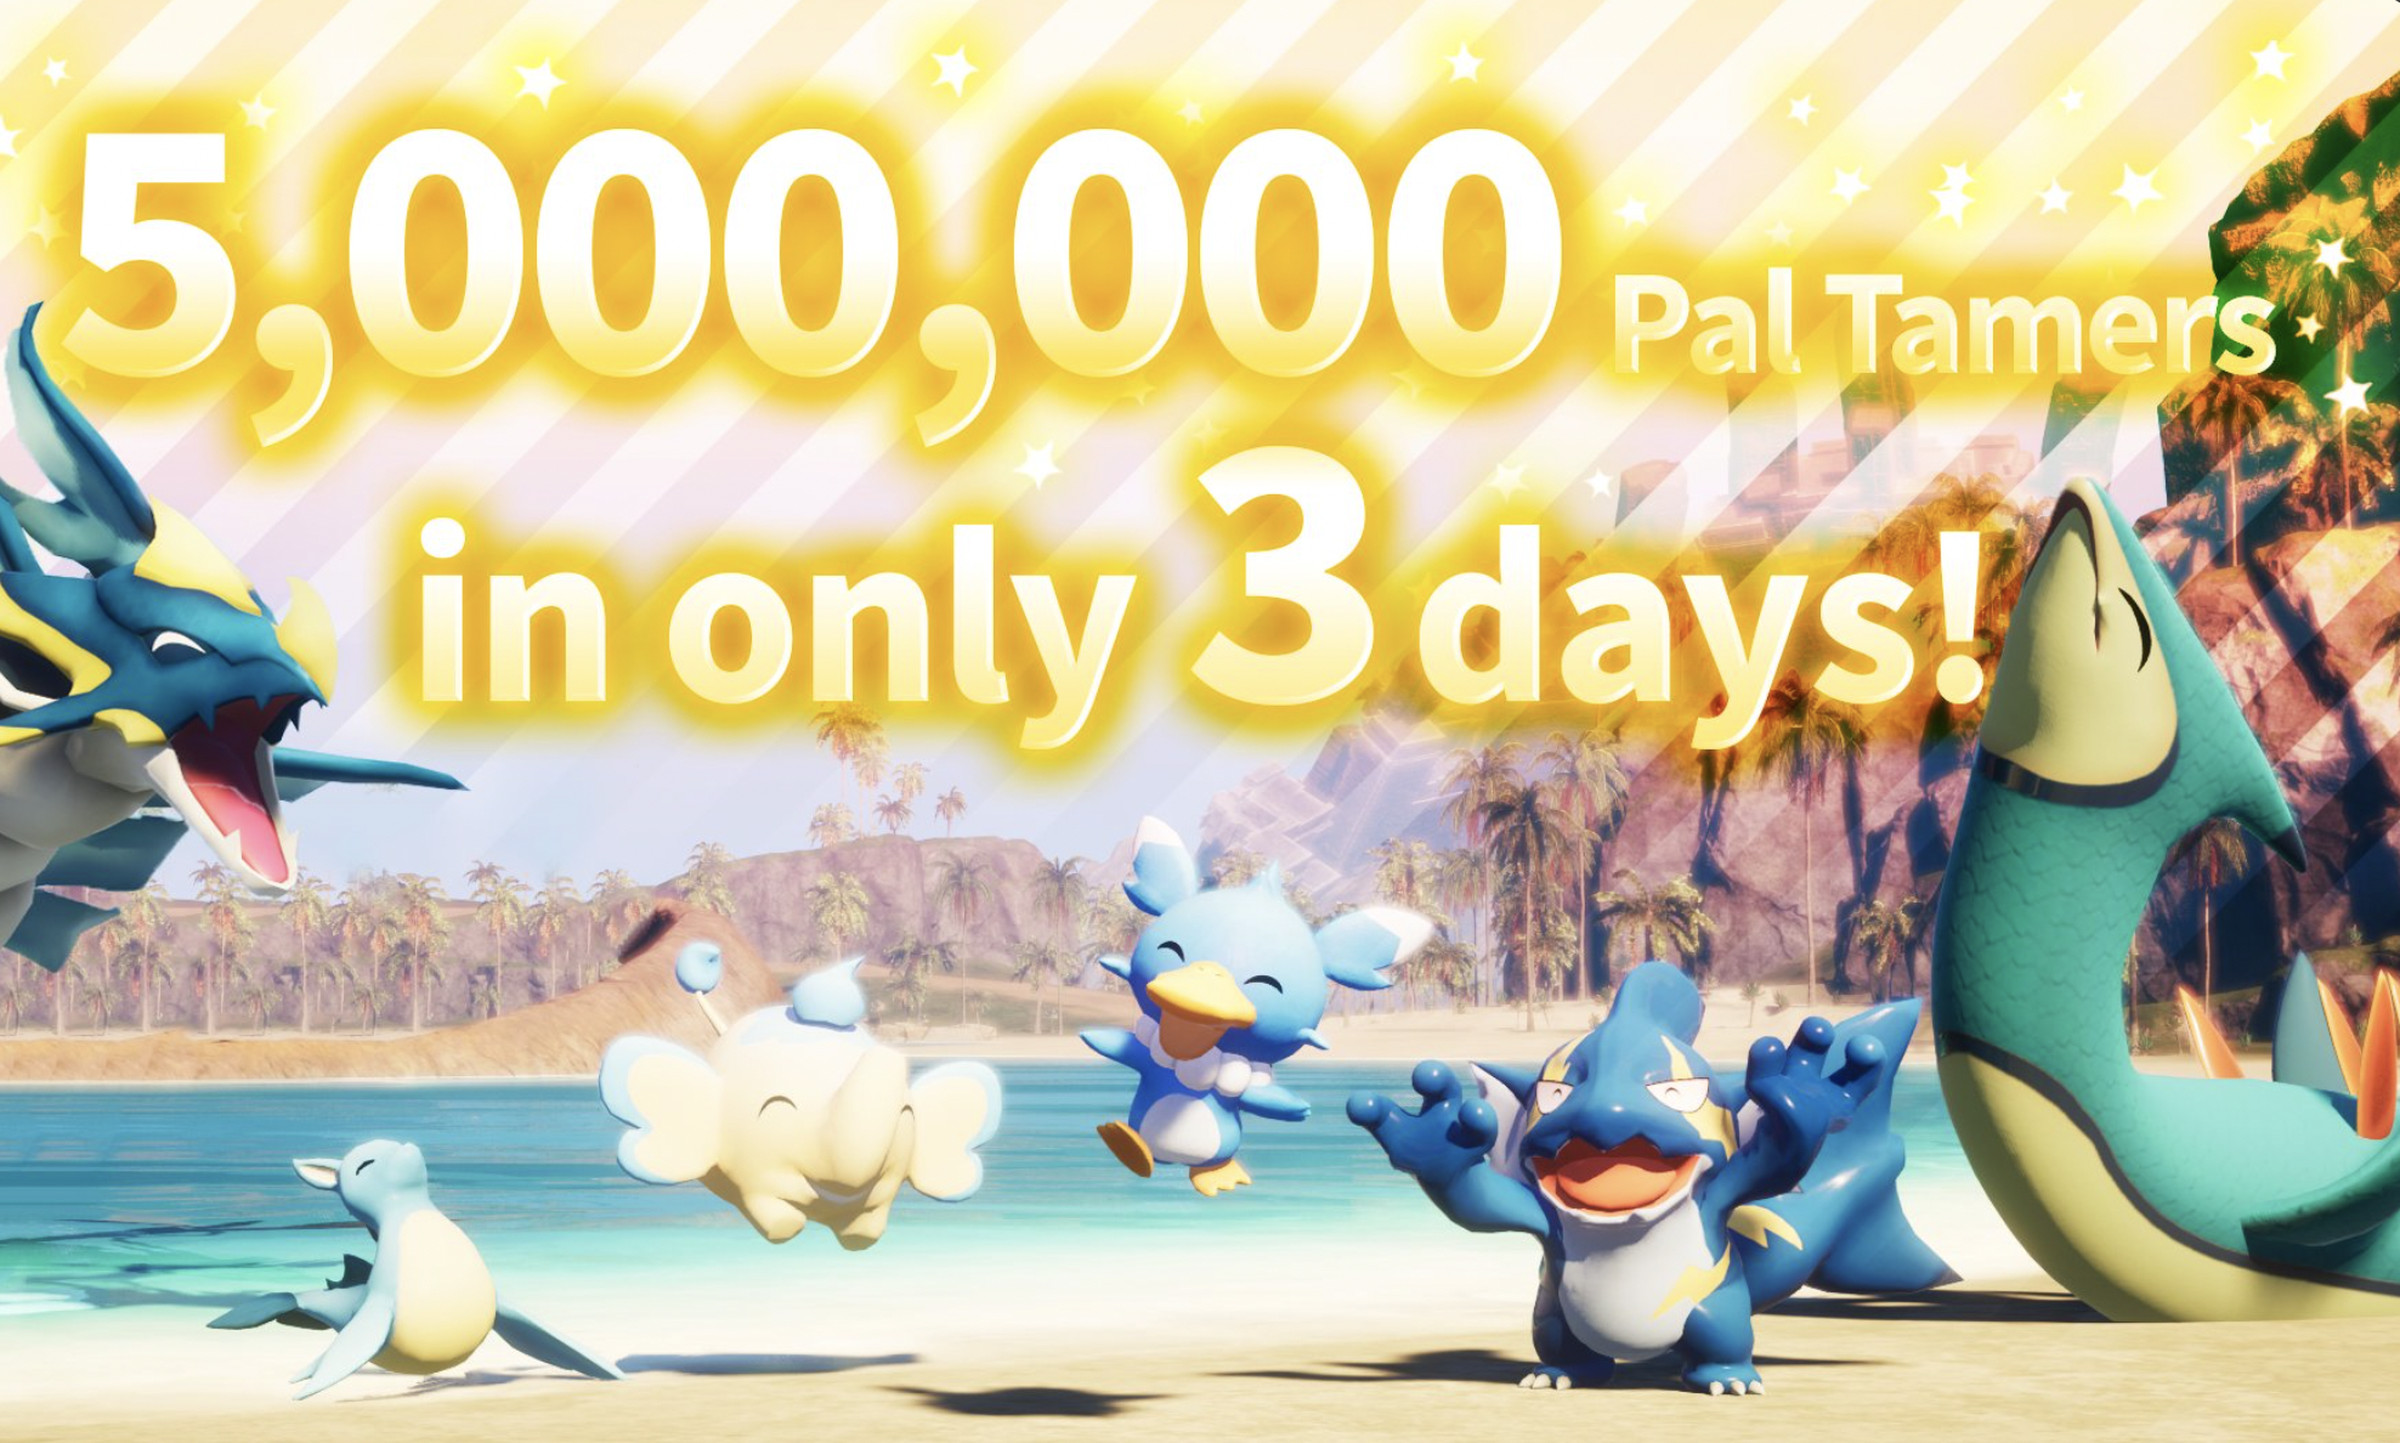 More than 5 million Pal Tamers in only 3 days! 